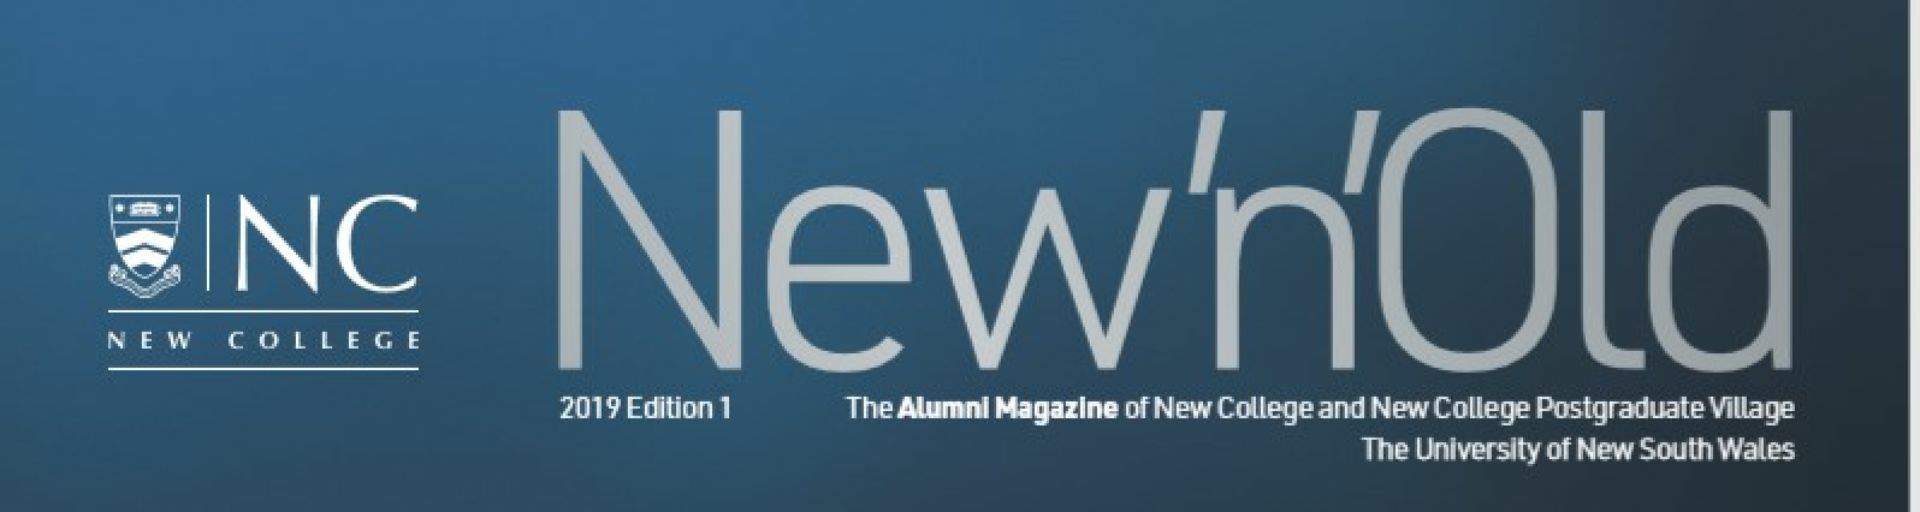 New n old magazine title